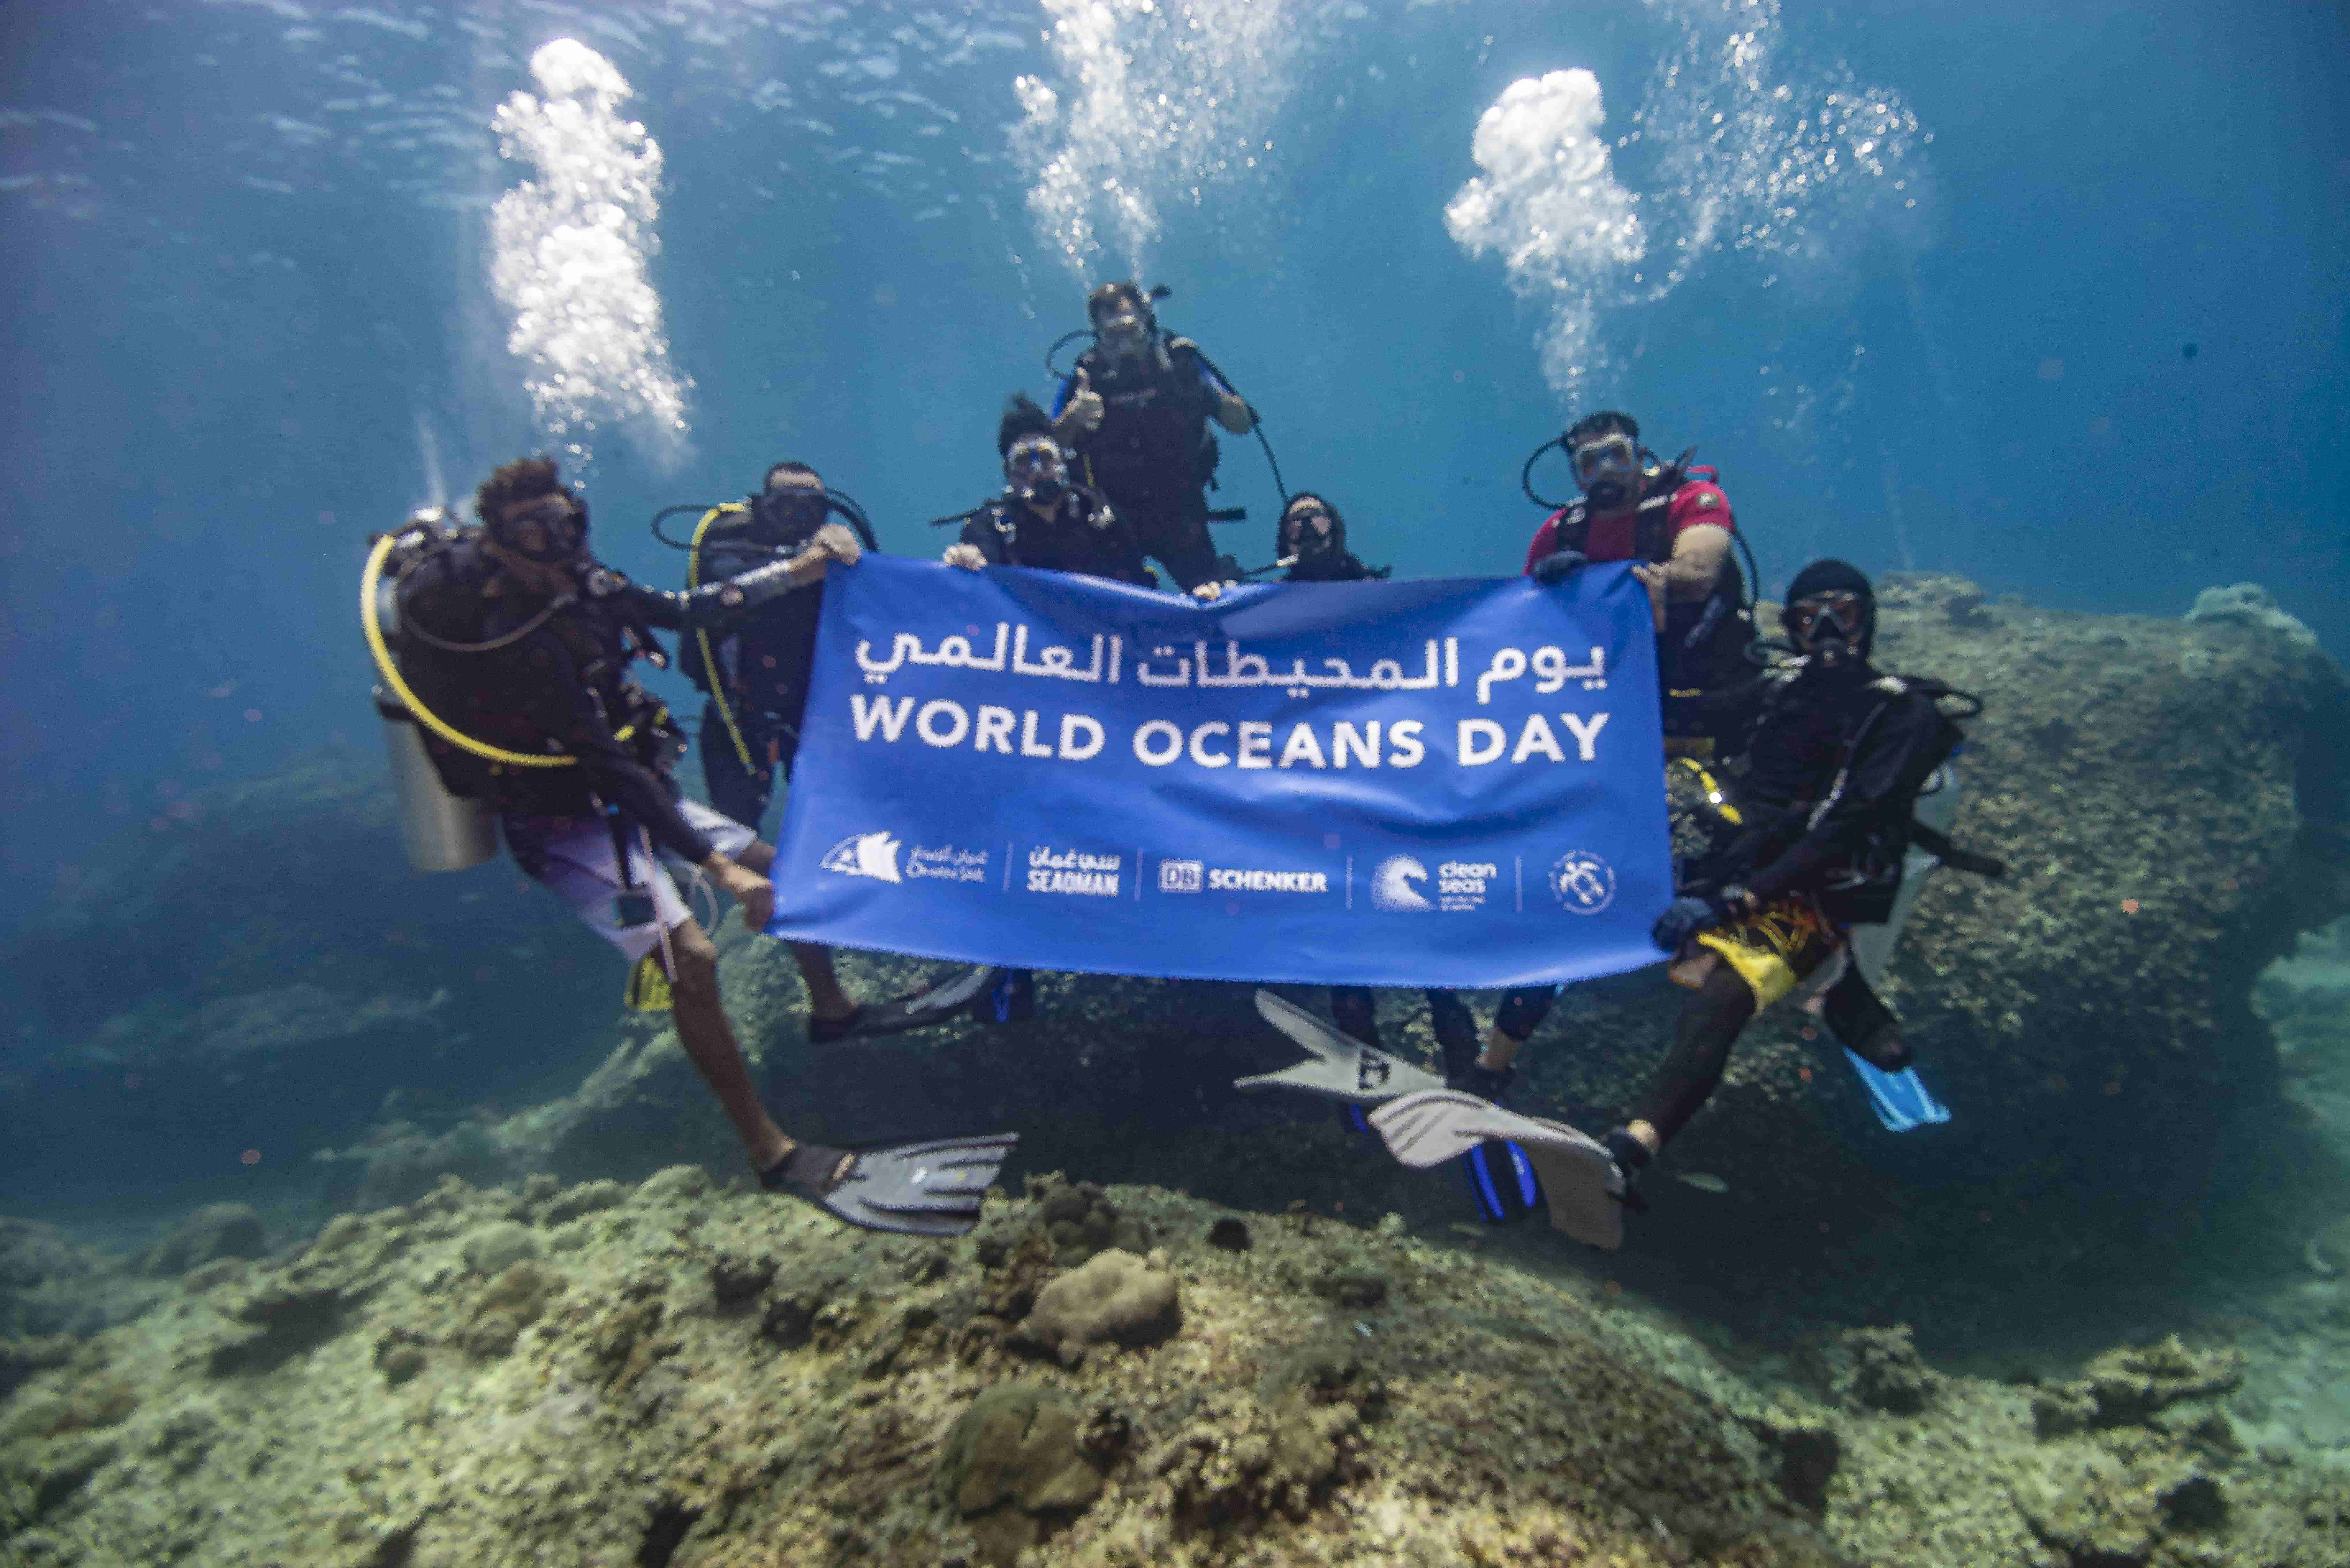 Celebrating World Oceans Day with an underwater clean-up mission